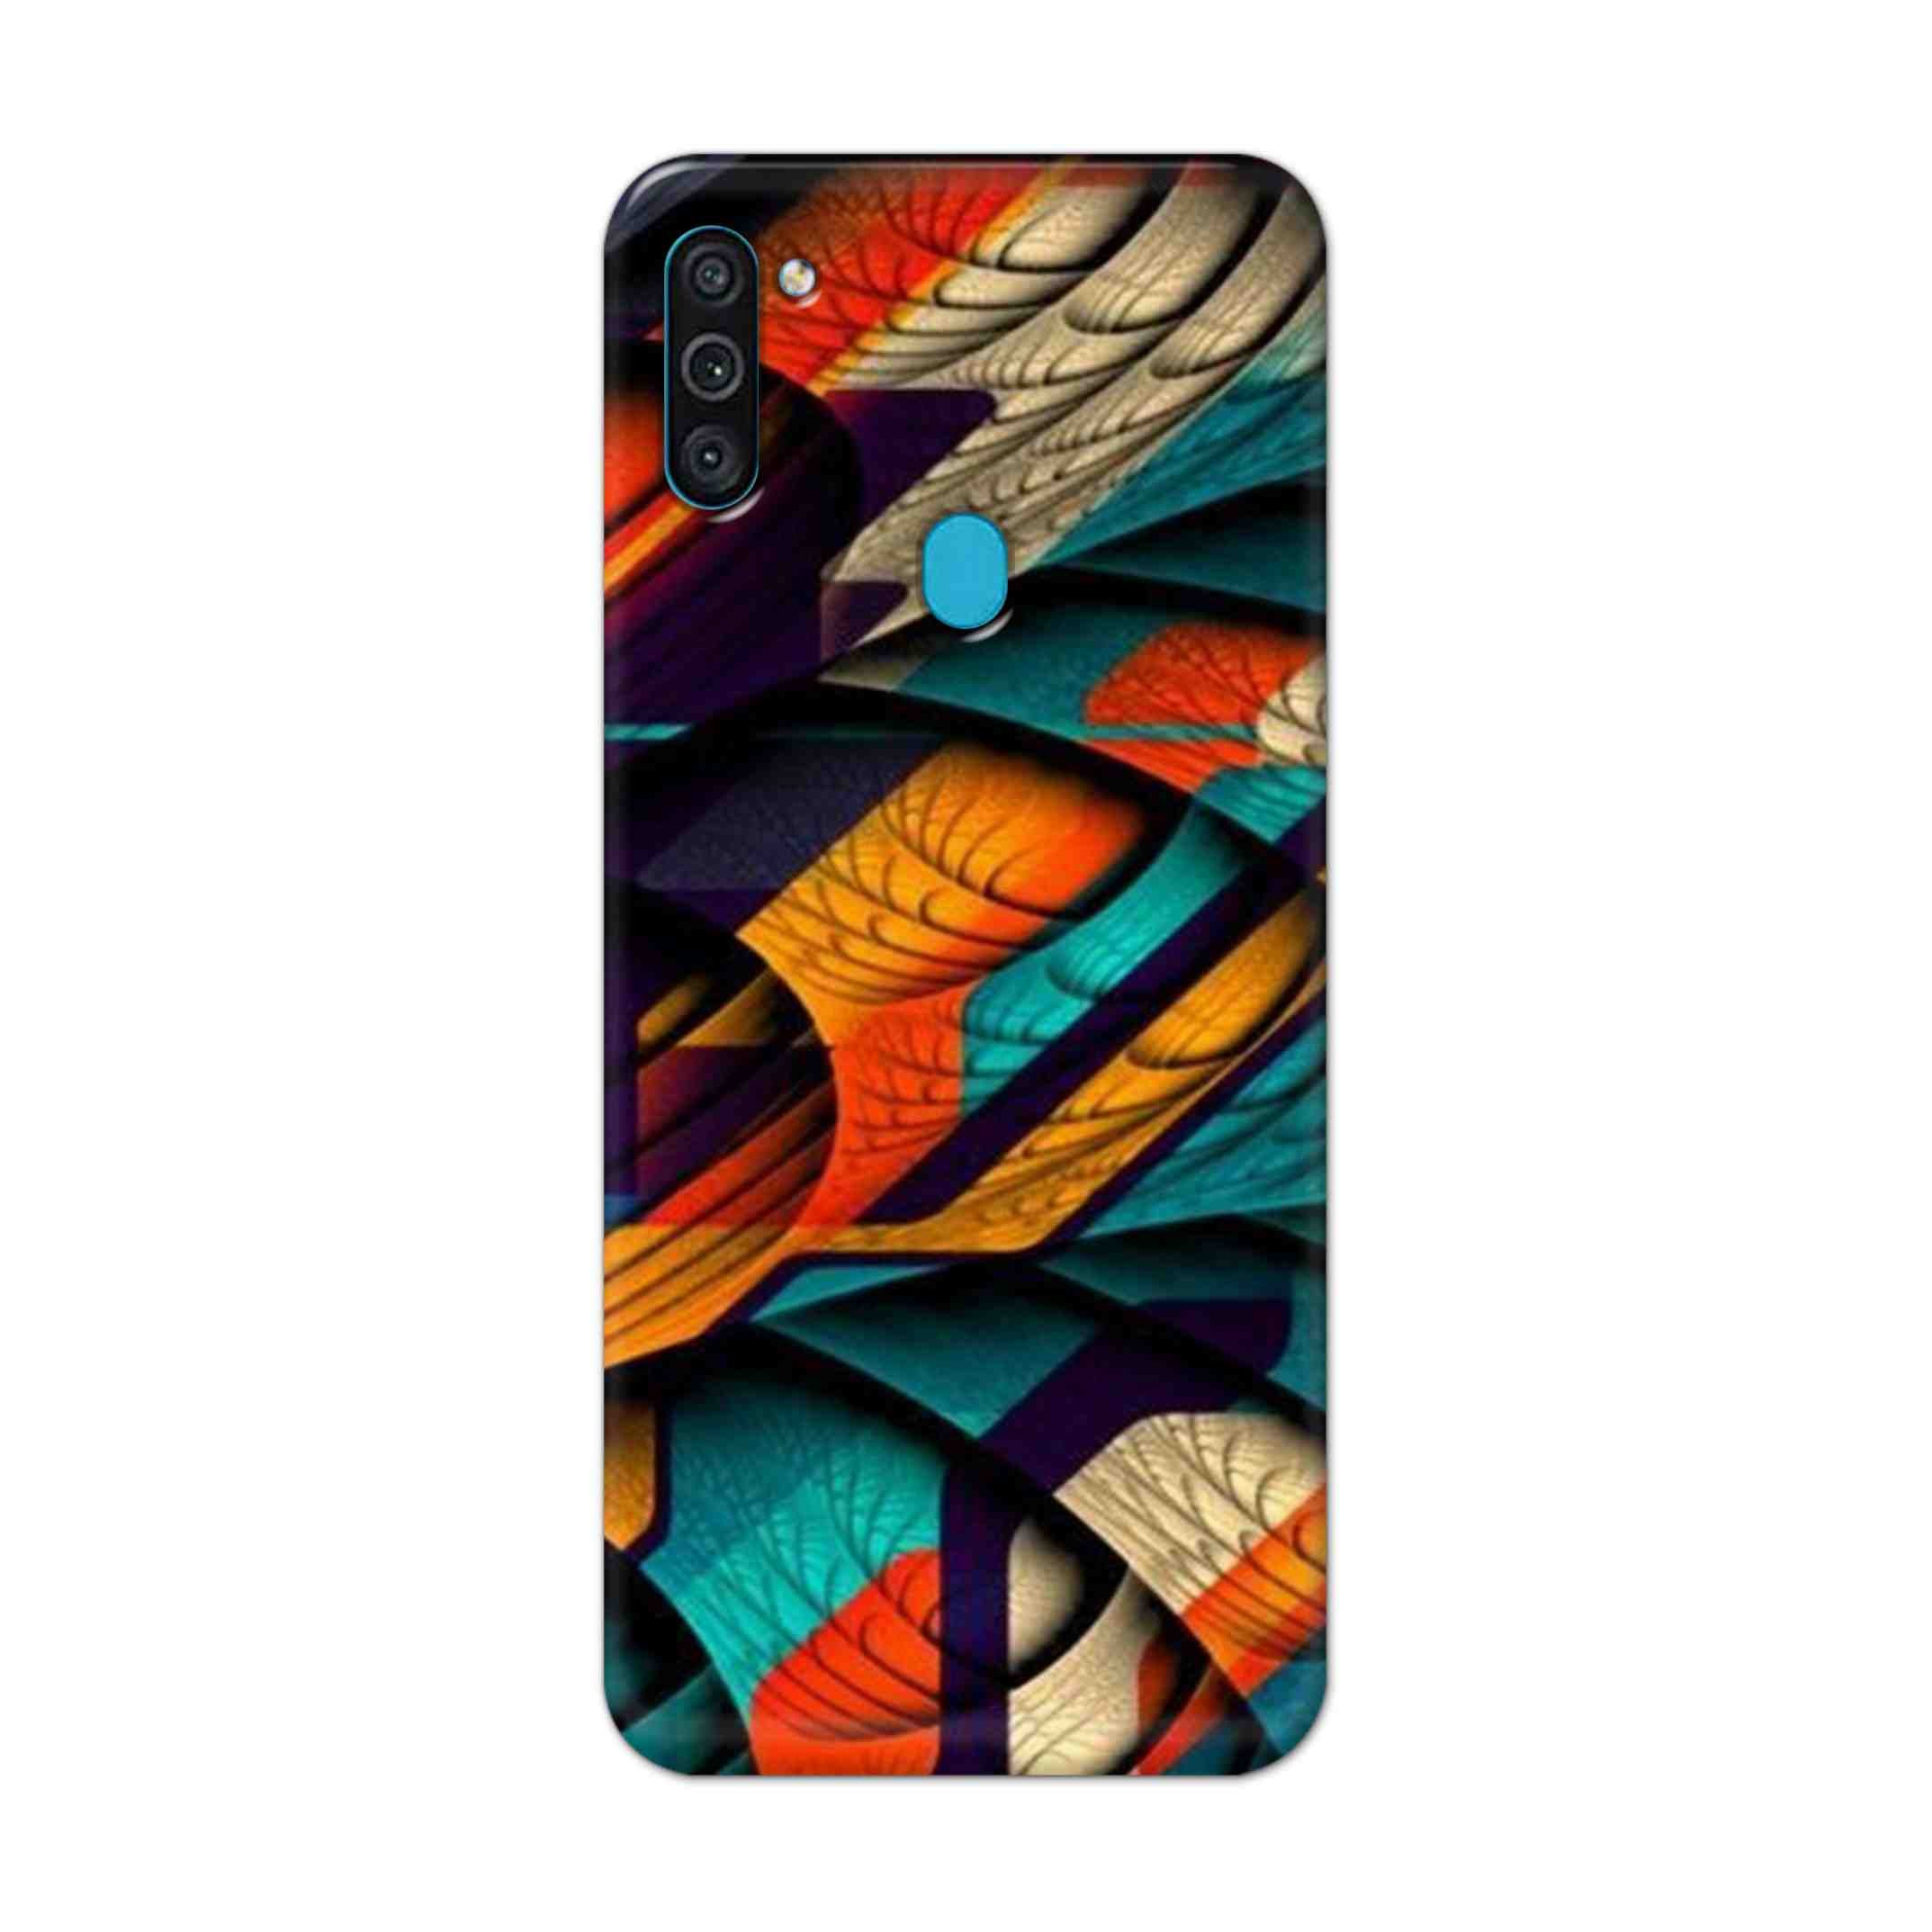 Buy Colour Abstract Hard Back Mobile Phone Case Cover For Samsung Galaxy M11 Online